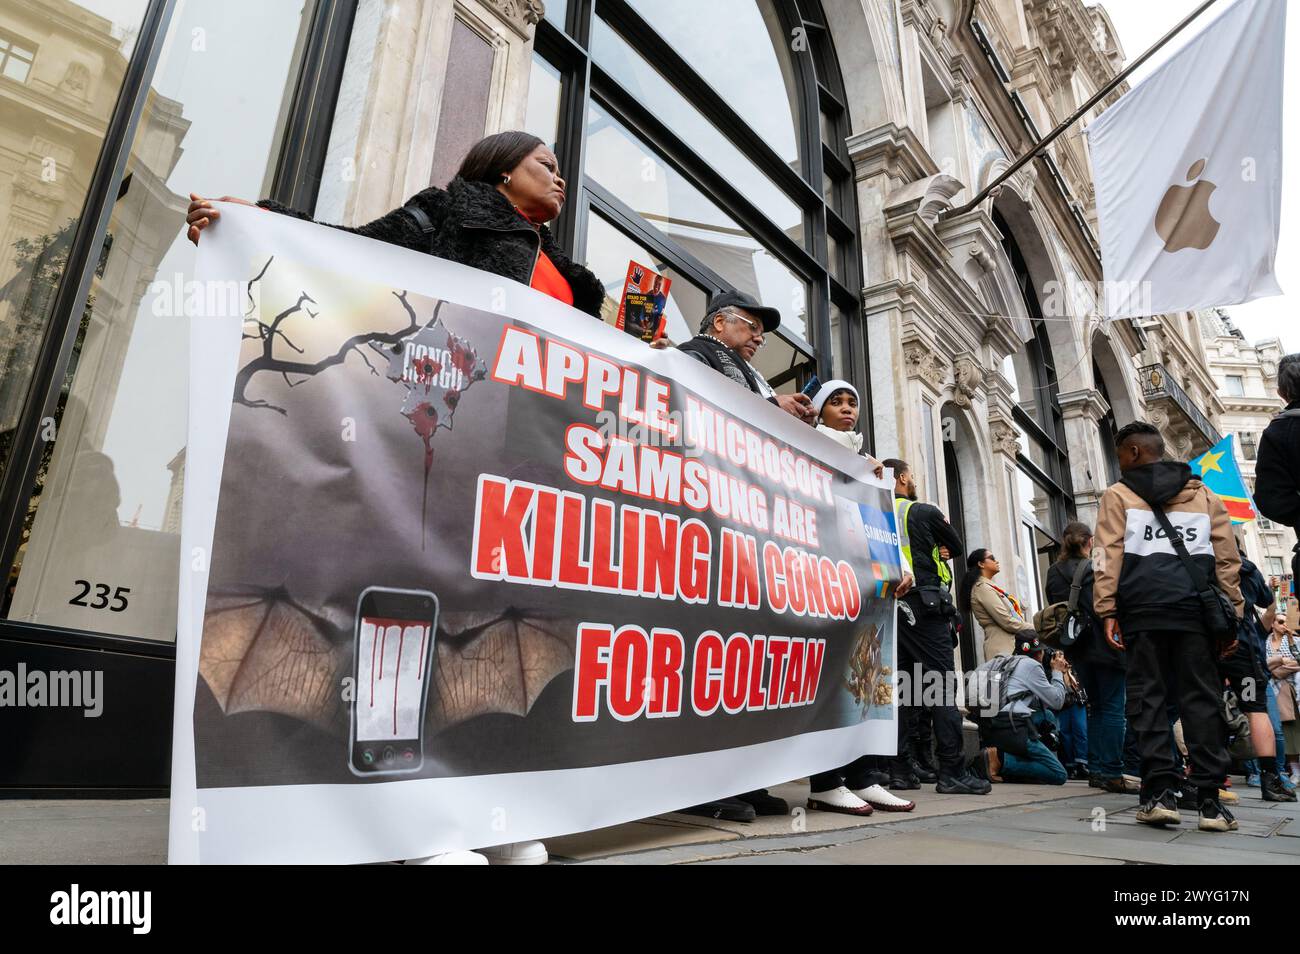 London, UK. 6 April 2024. Protest in support of women harmed, raped and killed in Democratic Republic of Congo. Protesters march toward Downing Street with a stop outside the Apple Store near Oxford Circus. Apple, Samsung and Microsoft are accused of benefiting from cheap child labour in DRC. Credit: Andrea Domeniconi/Alamy Live News Stock Photo